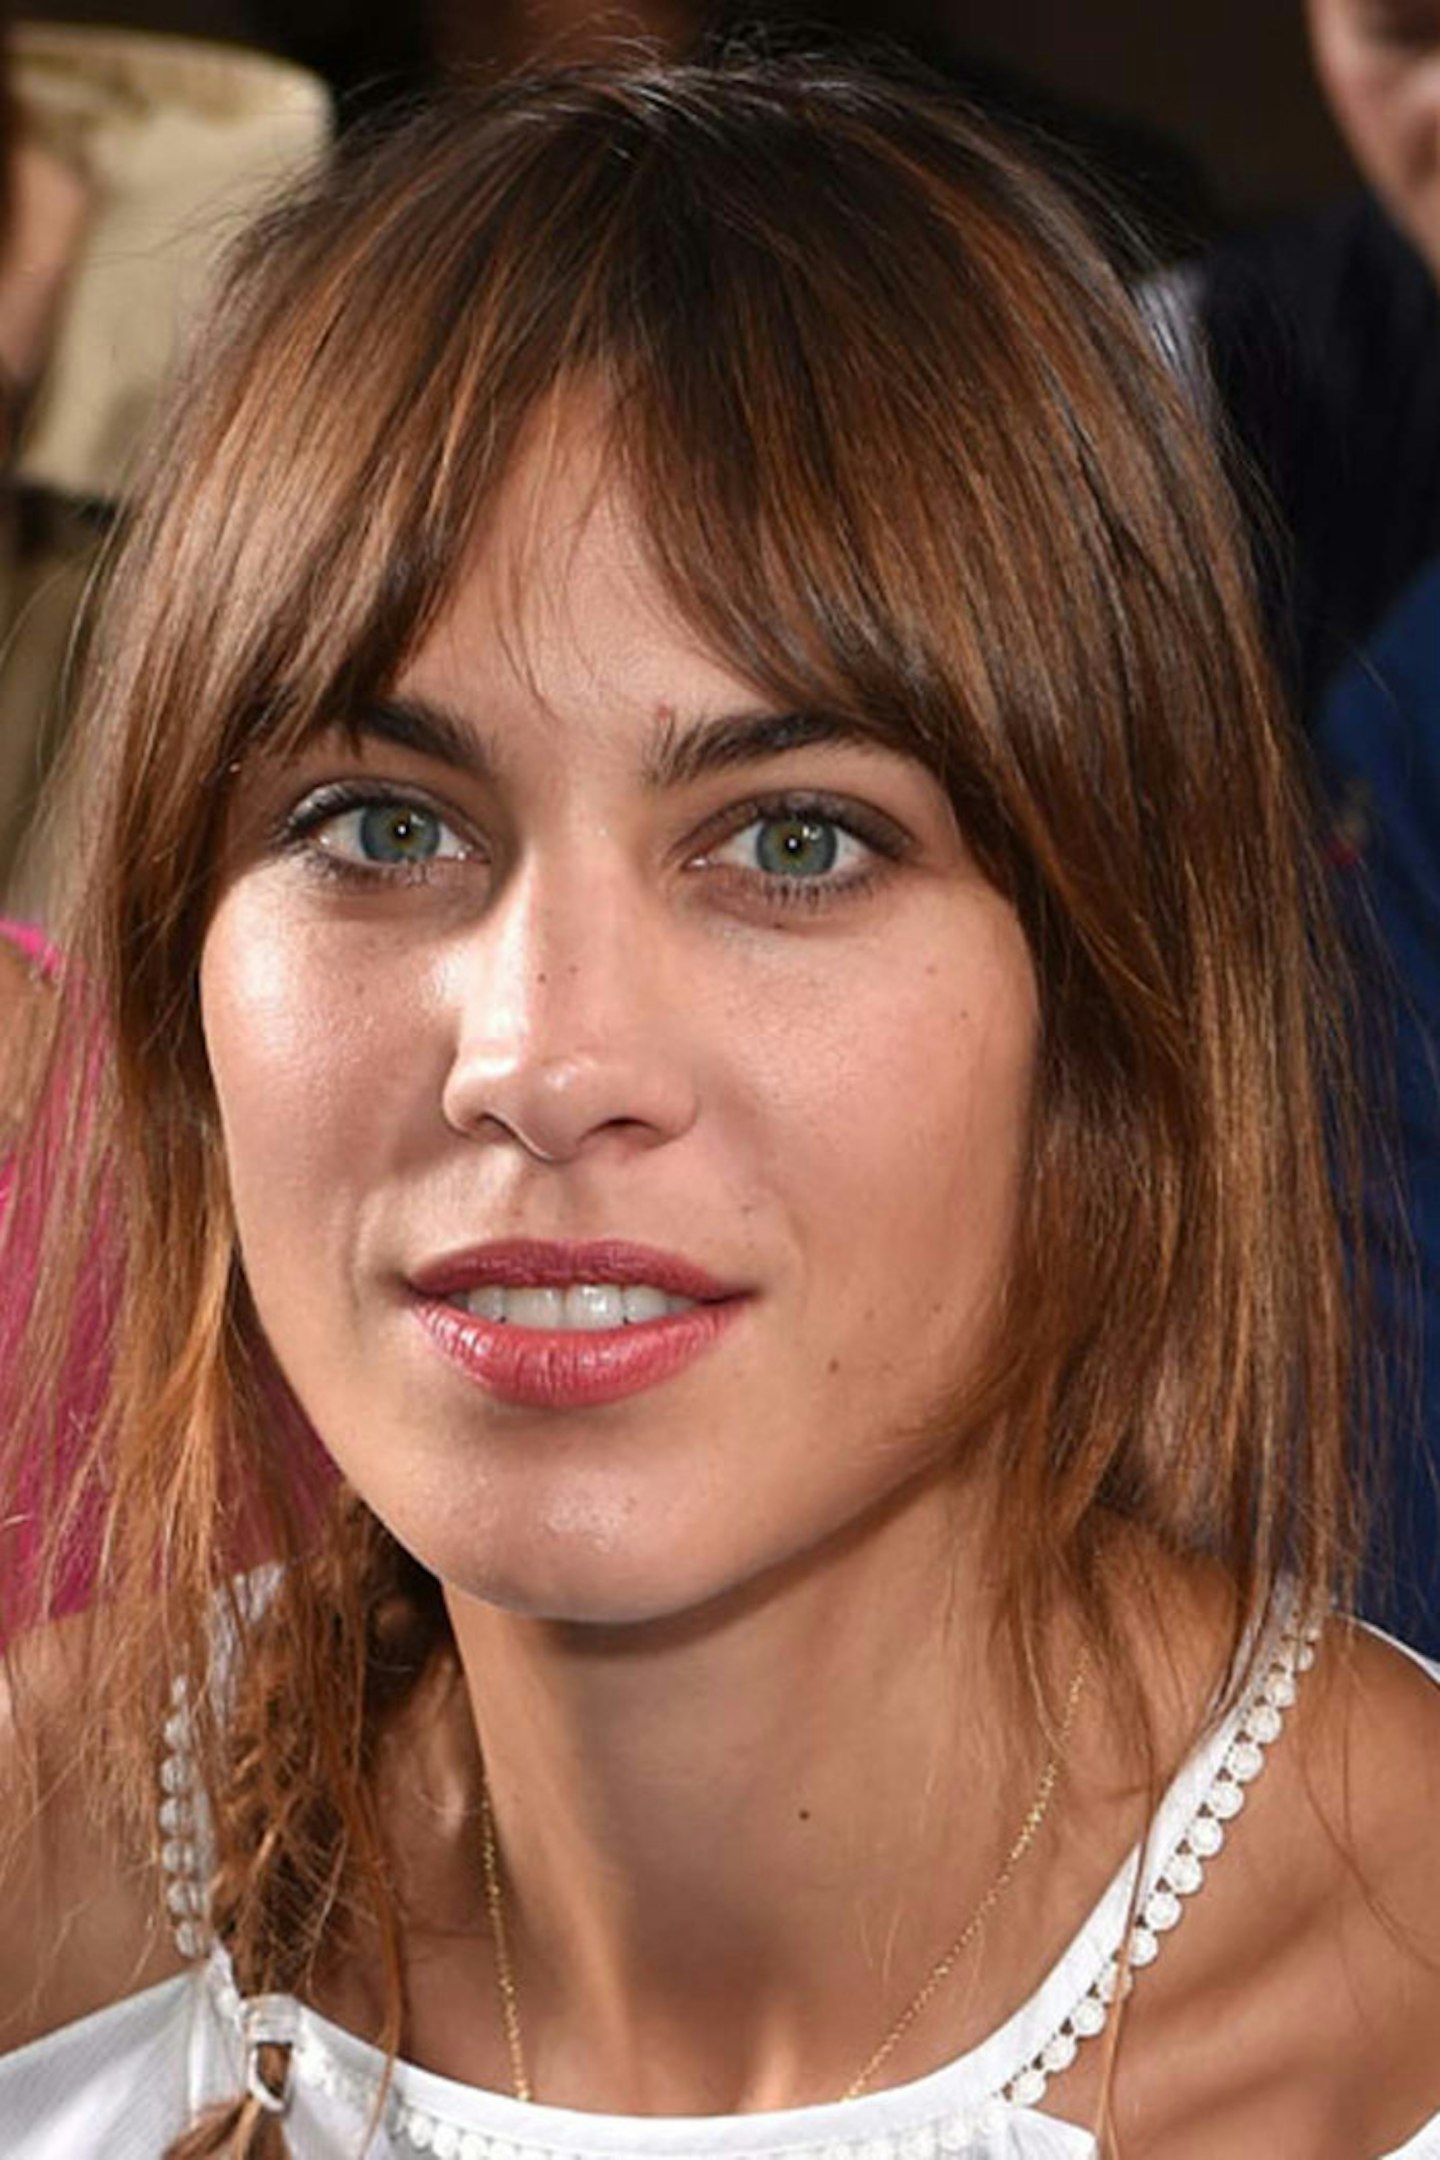 DO bear in mind that pigtails can be chic- just ask Alexa Chung!